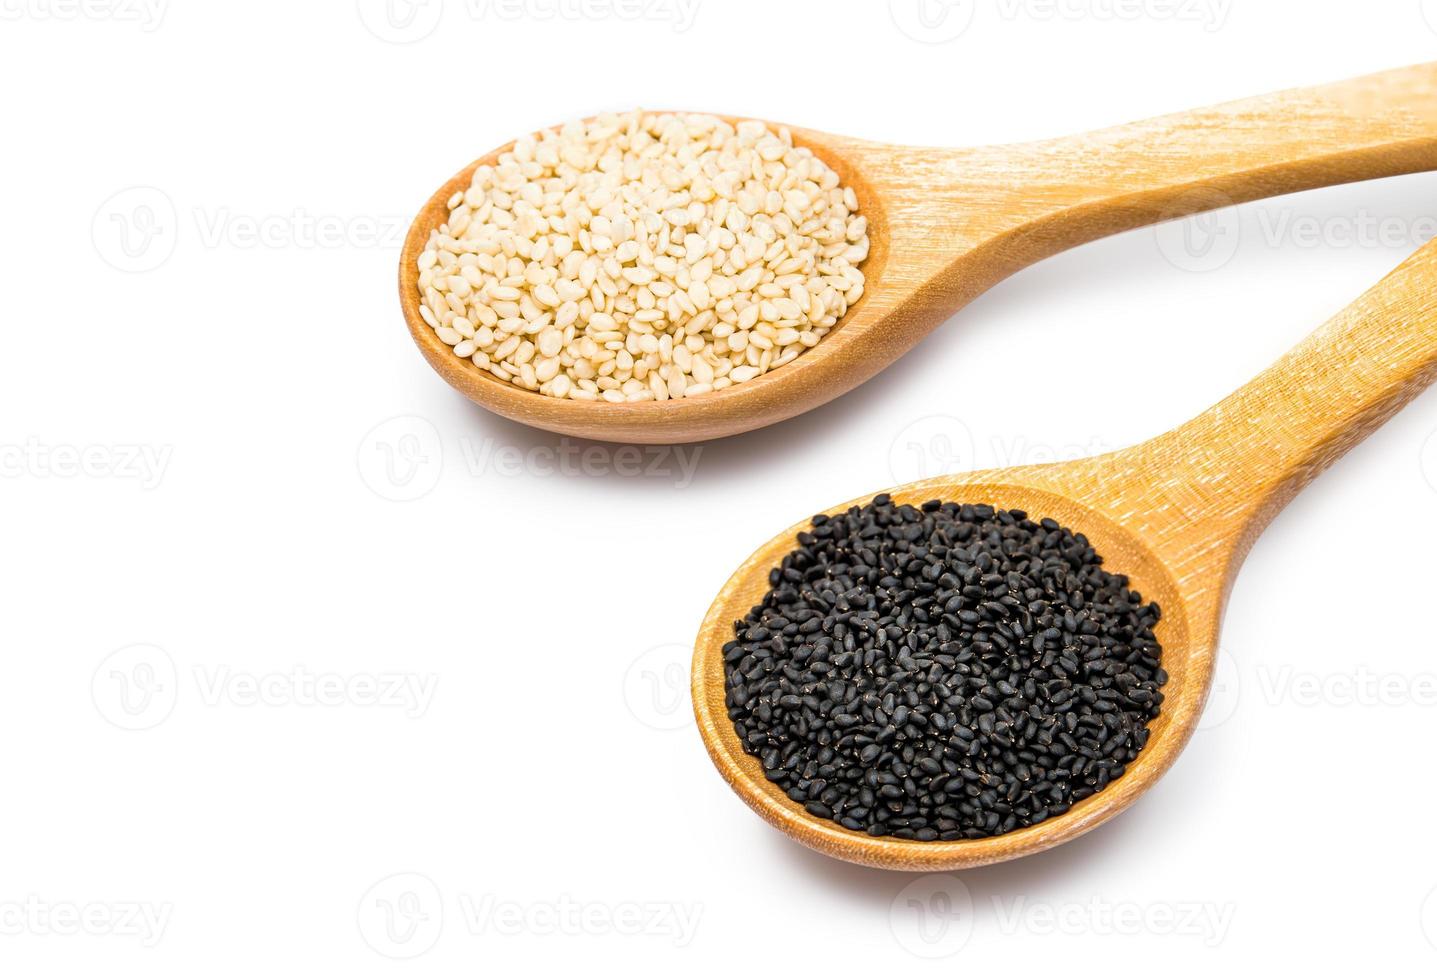 white and black sesame seeds with spoon isolated on white background. organic natural sesame seeds with spoon on background. toasted sesame seeds with spoon on white background photo